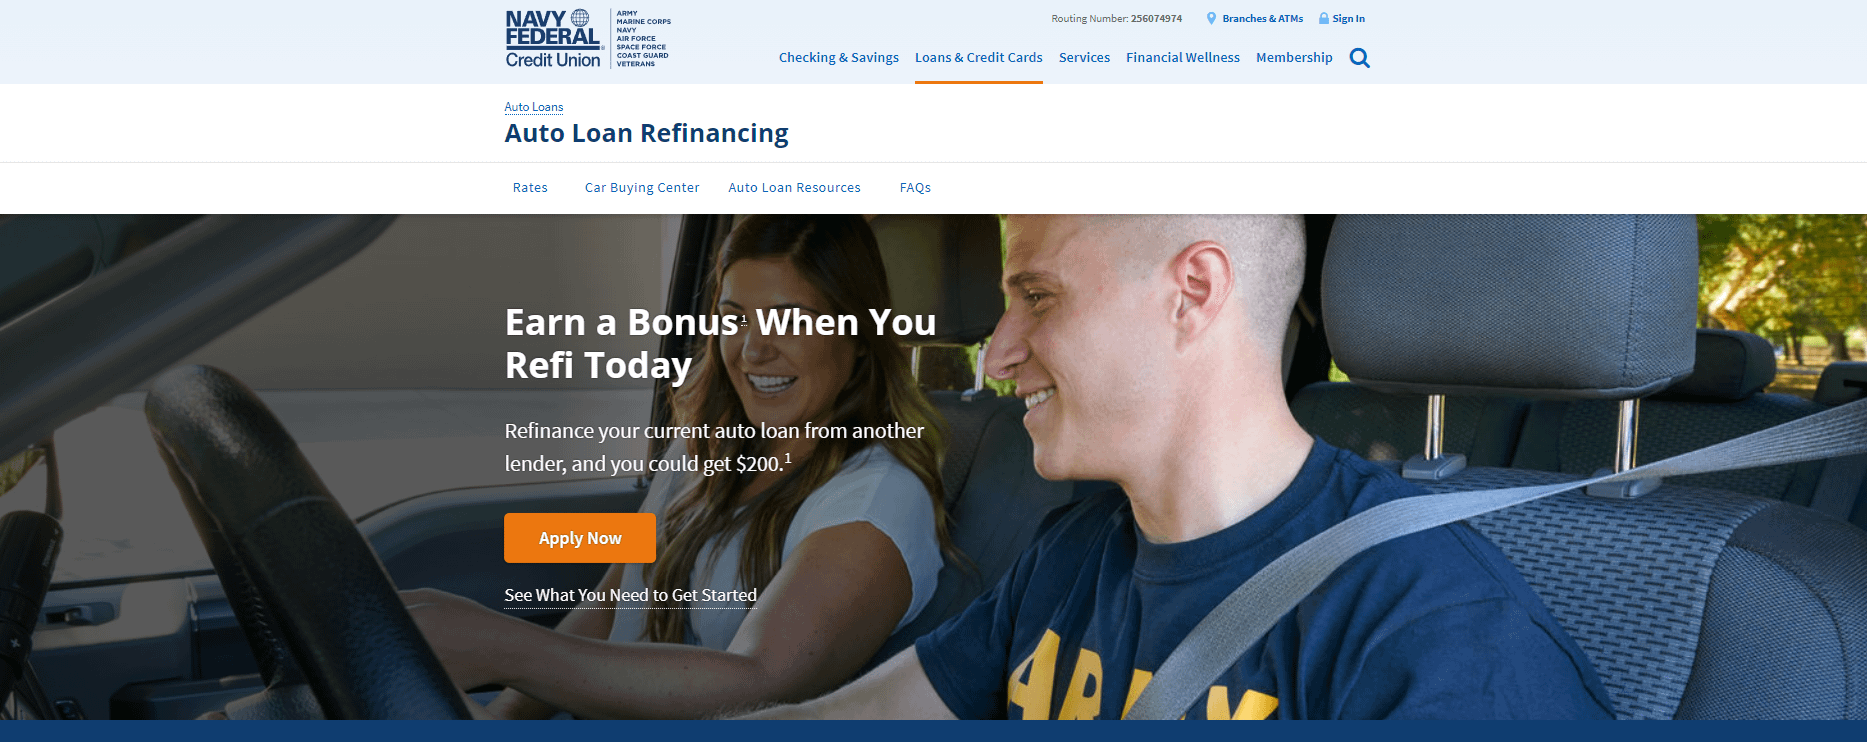 Navy Federal auto loan refinancing page